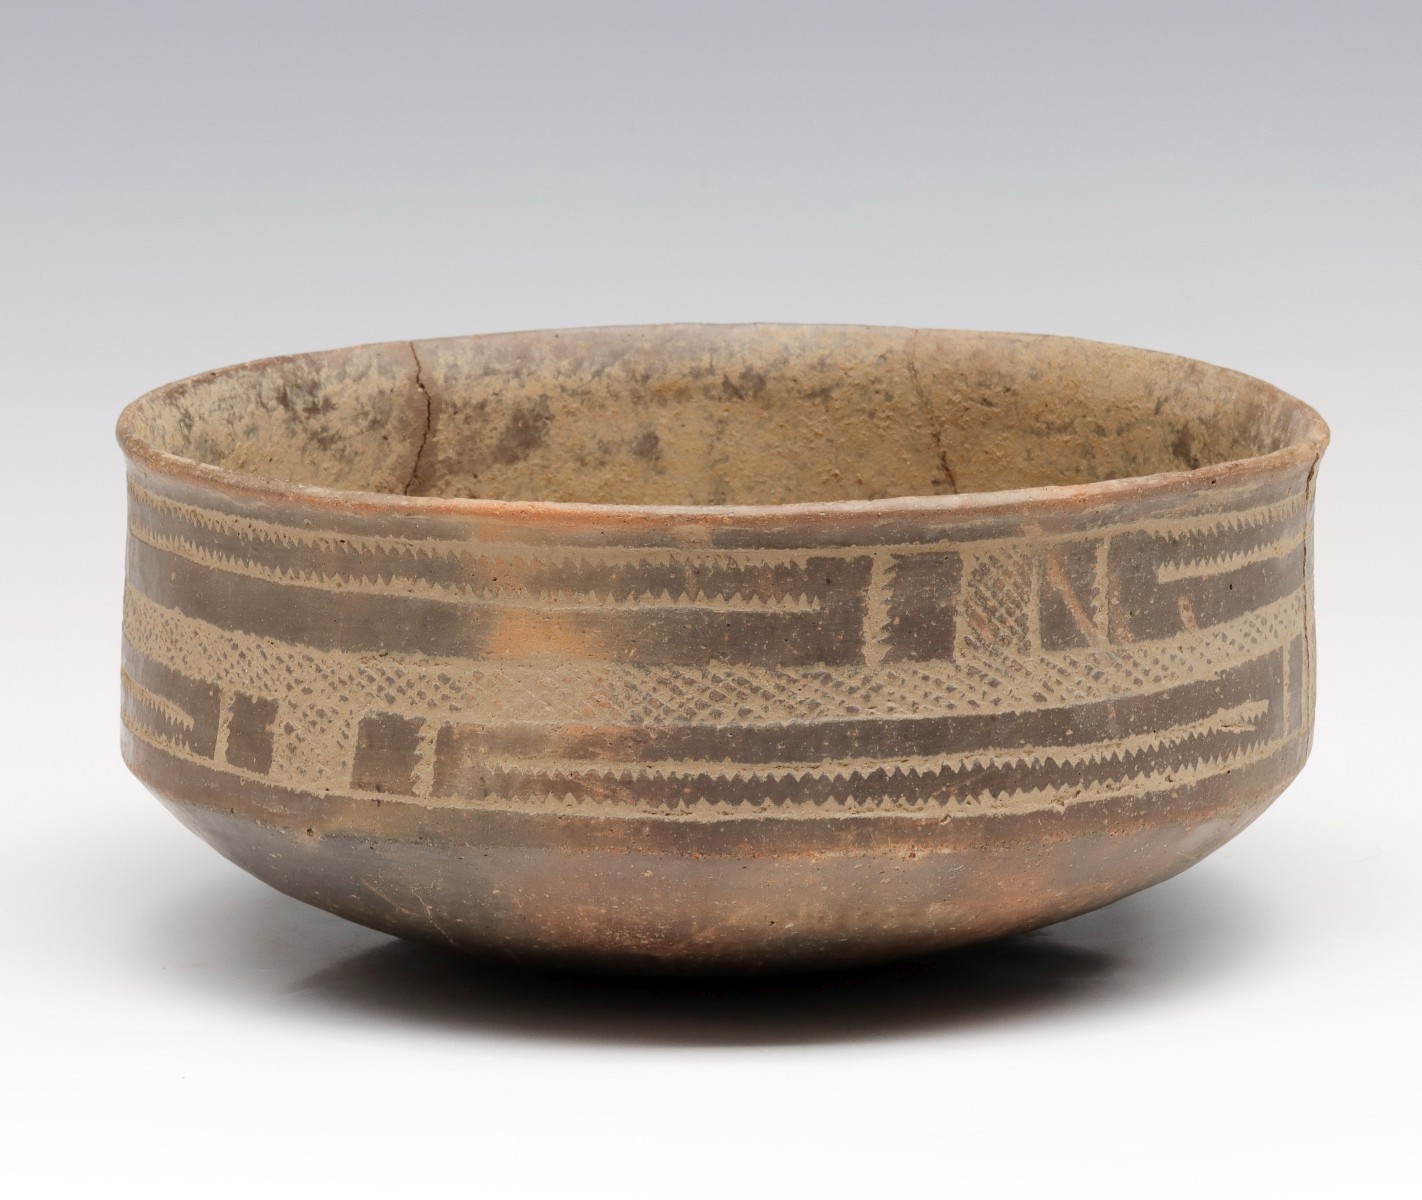 MISSISSIPPIAN/CADDO PREHISTORIC PERIOD POTTERY BOWL